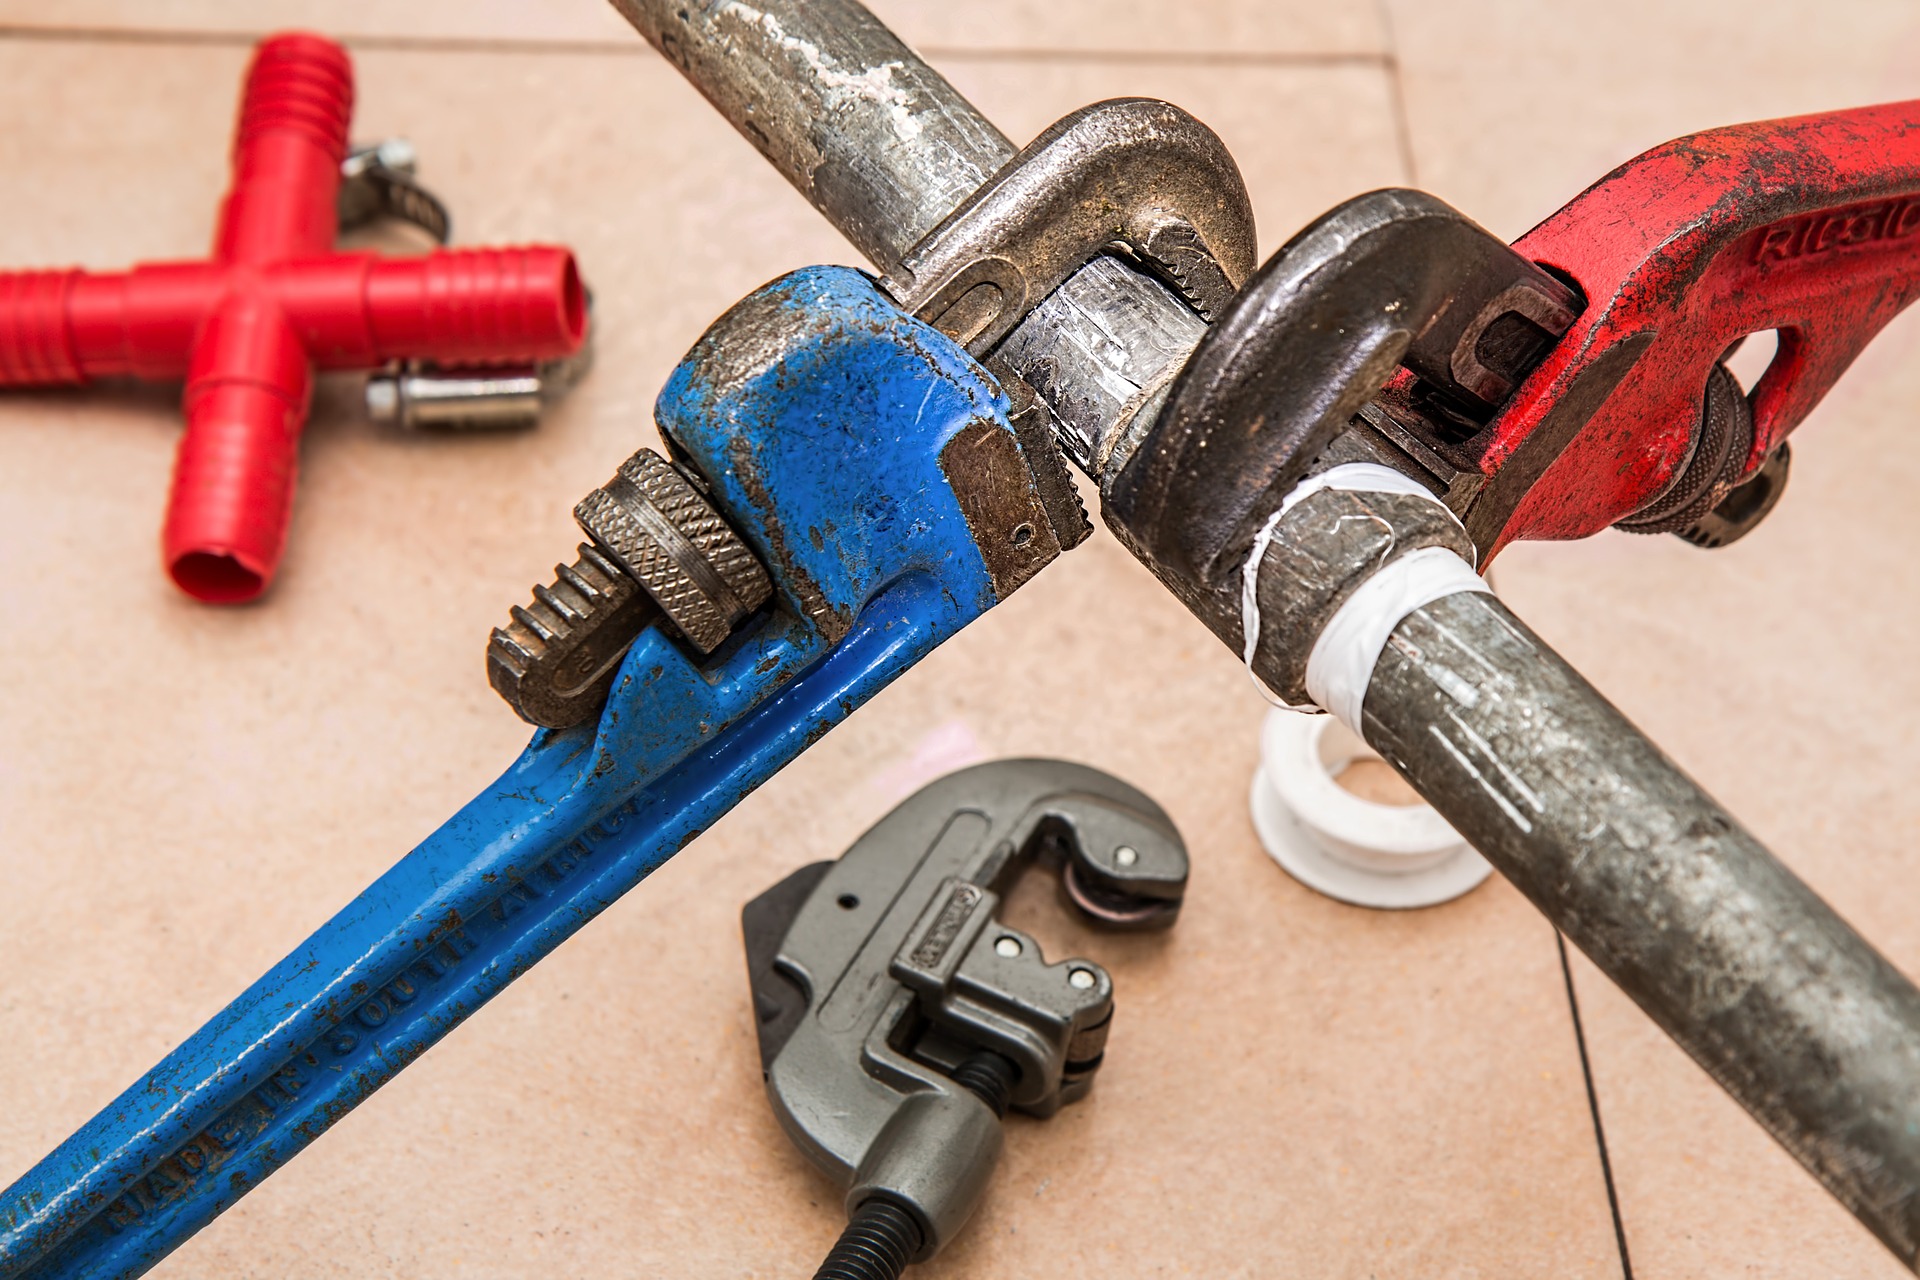 Plumbing_equipment_on_a_Pipe_Meant_to_increase_property_value_and_for_building_home_equity